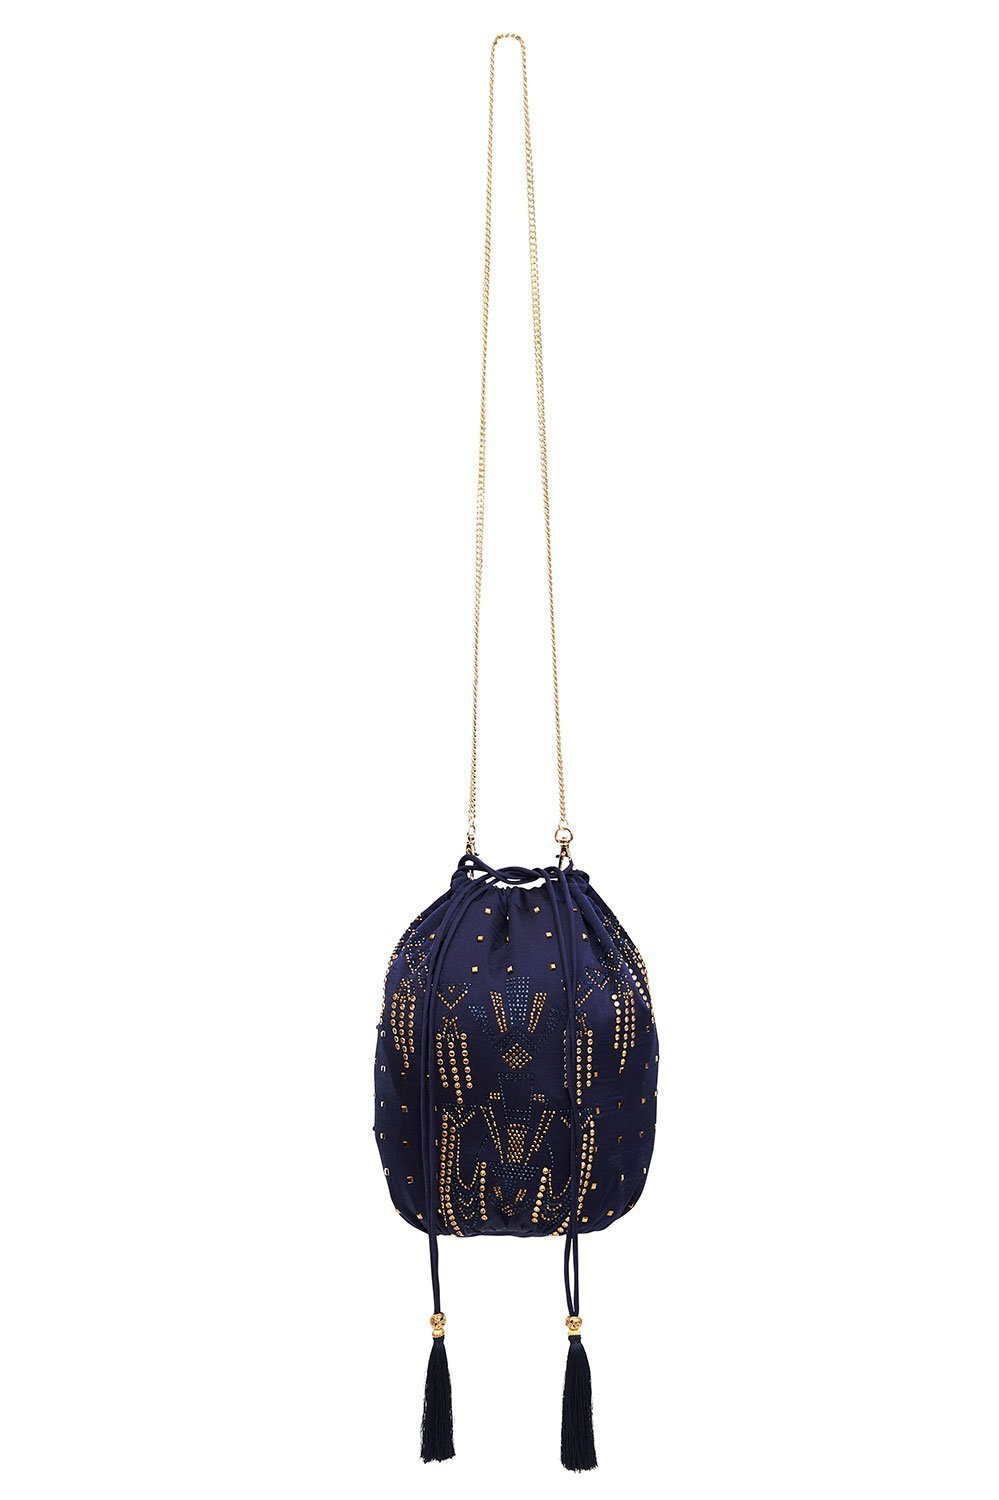 ROUND DRAWSTRING POUCH WITH BEADING LUXE NAVY